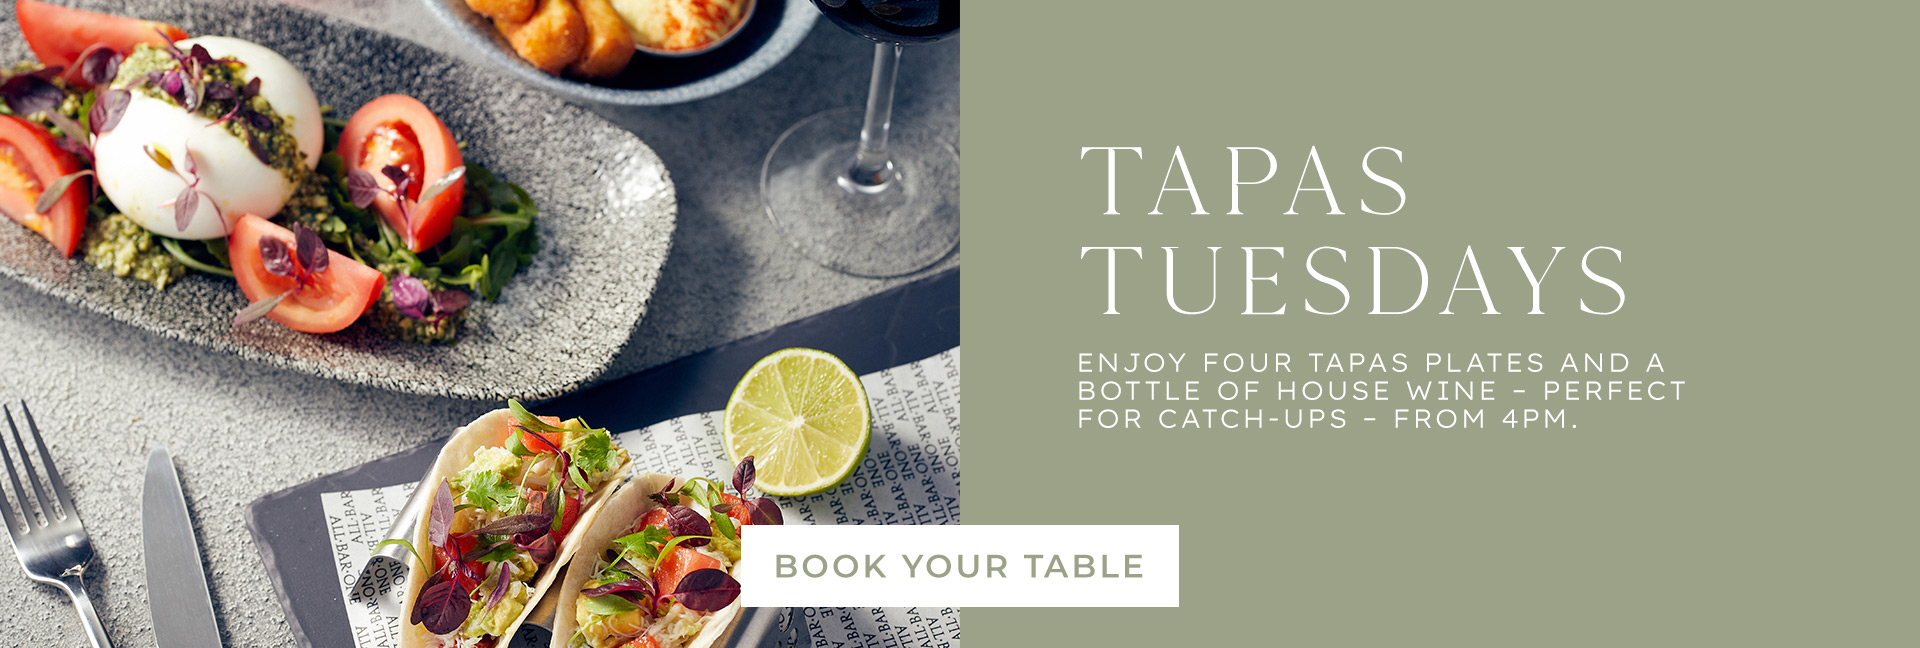 Tapas Tuesday at All Bar One Tower of London - Book now